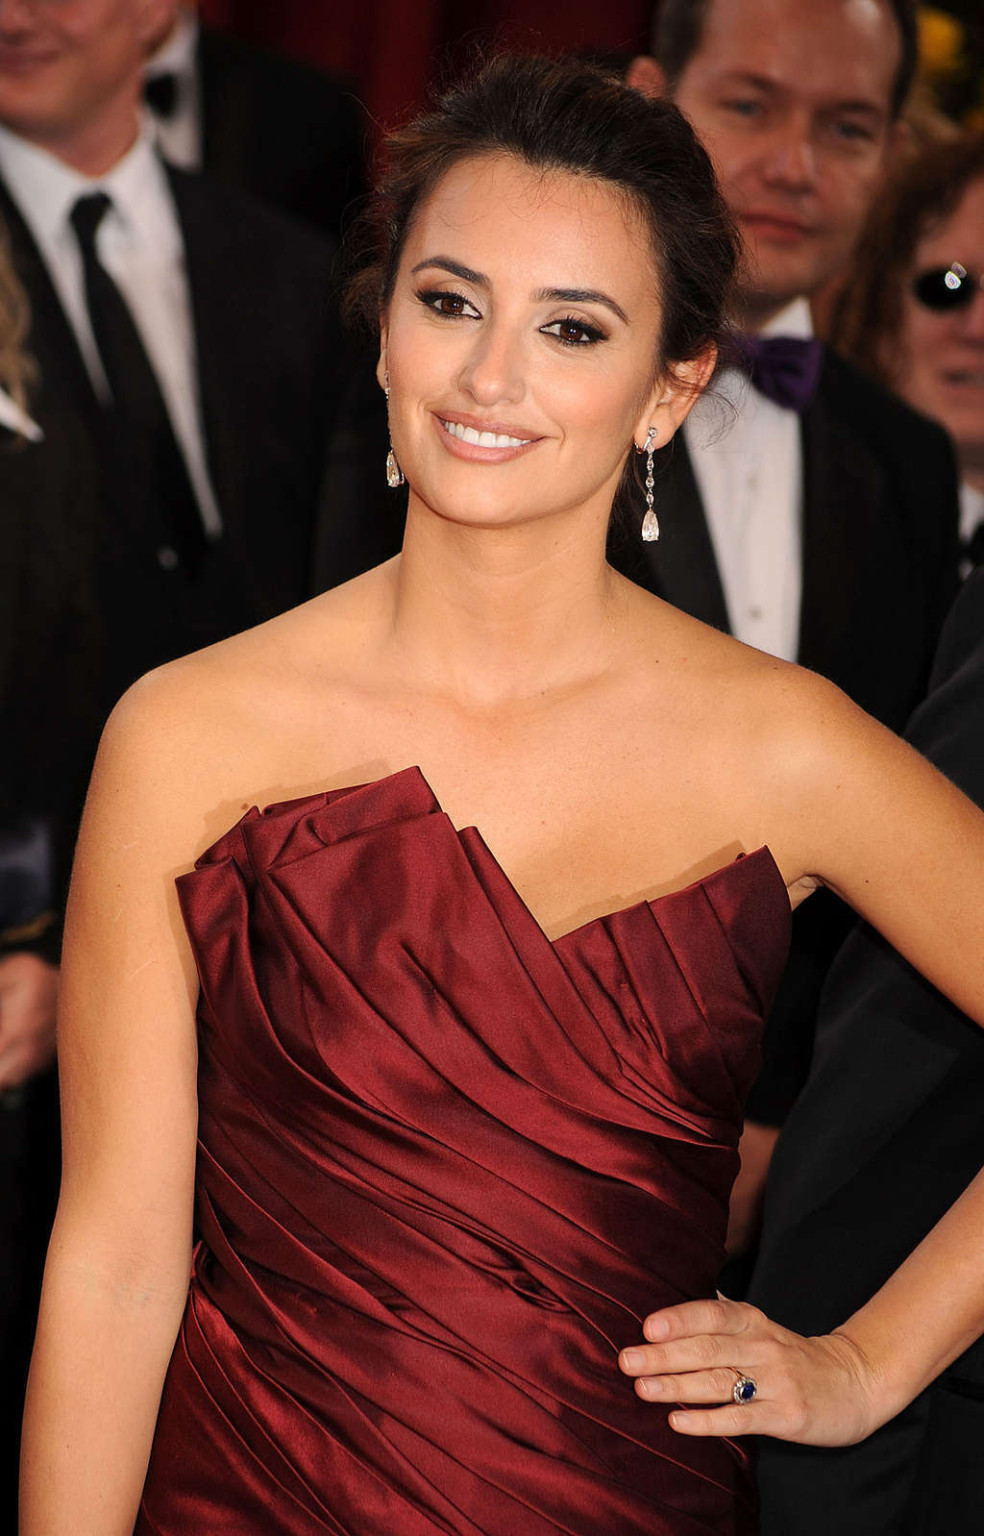 Penelope Cruz looking very hot and sexy in her evening skirt #75357118